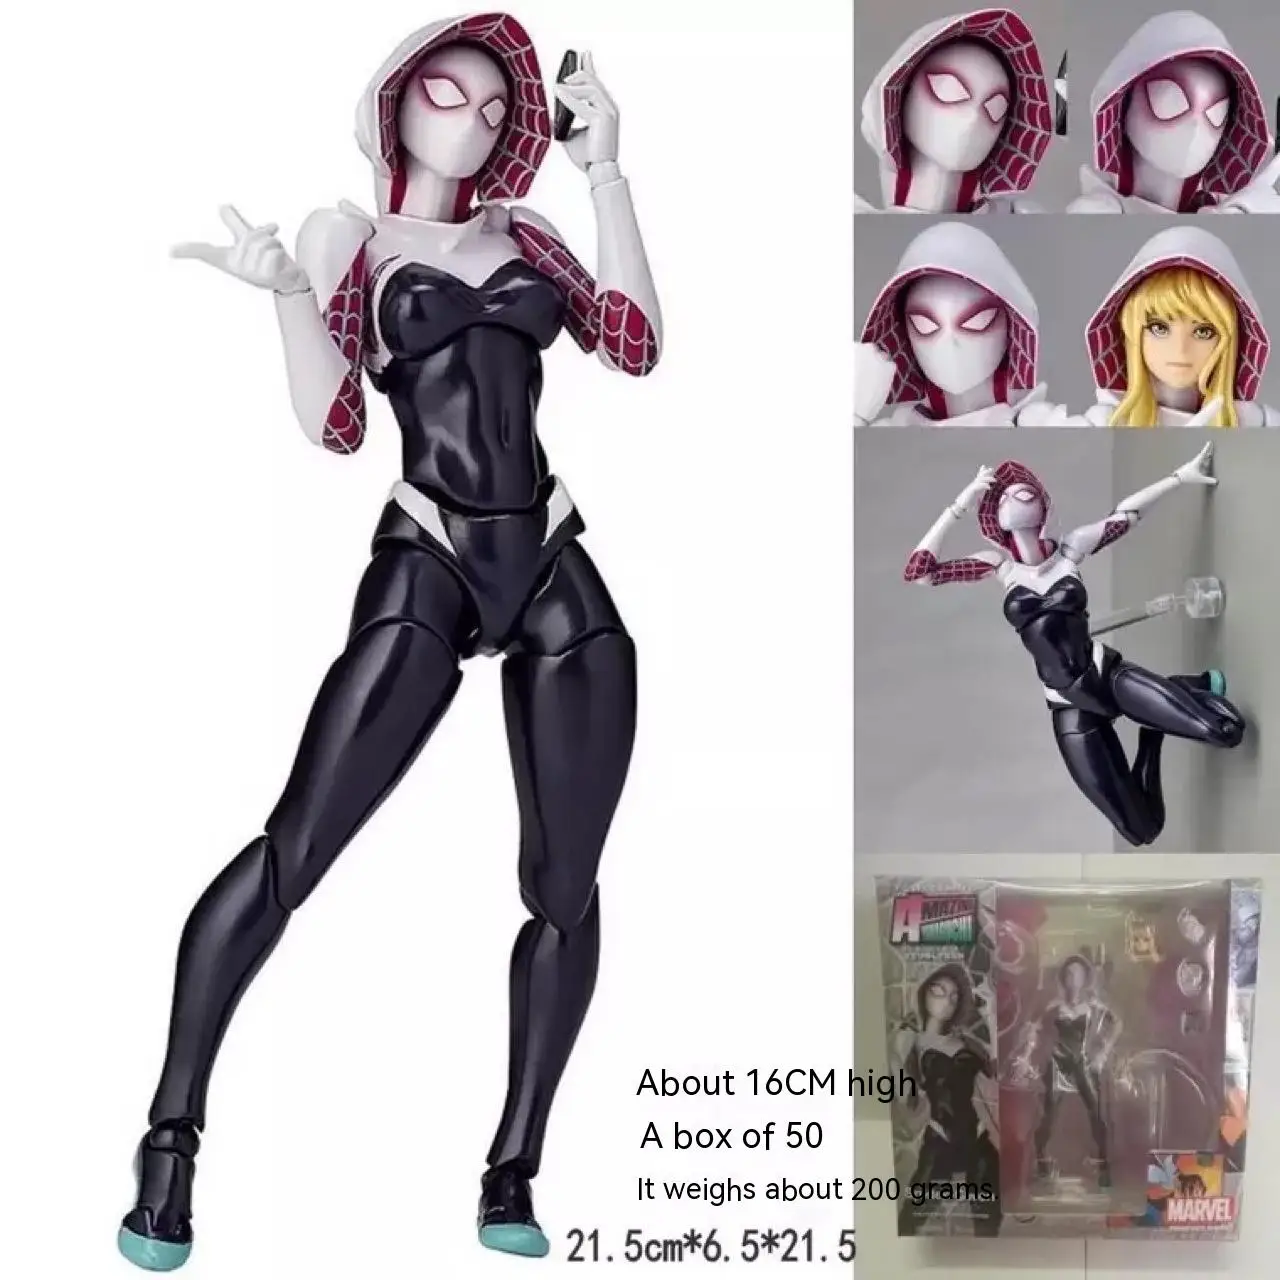 

16cm Spider Man Gwen Stacy Anime Action Figure Female Spiderman Movie Dolls Collectible Model Decoration Children Toys Gifts